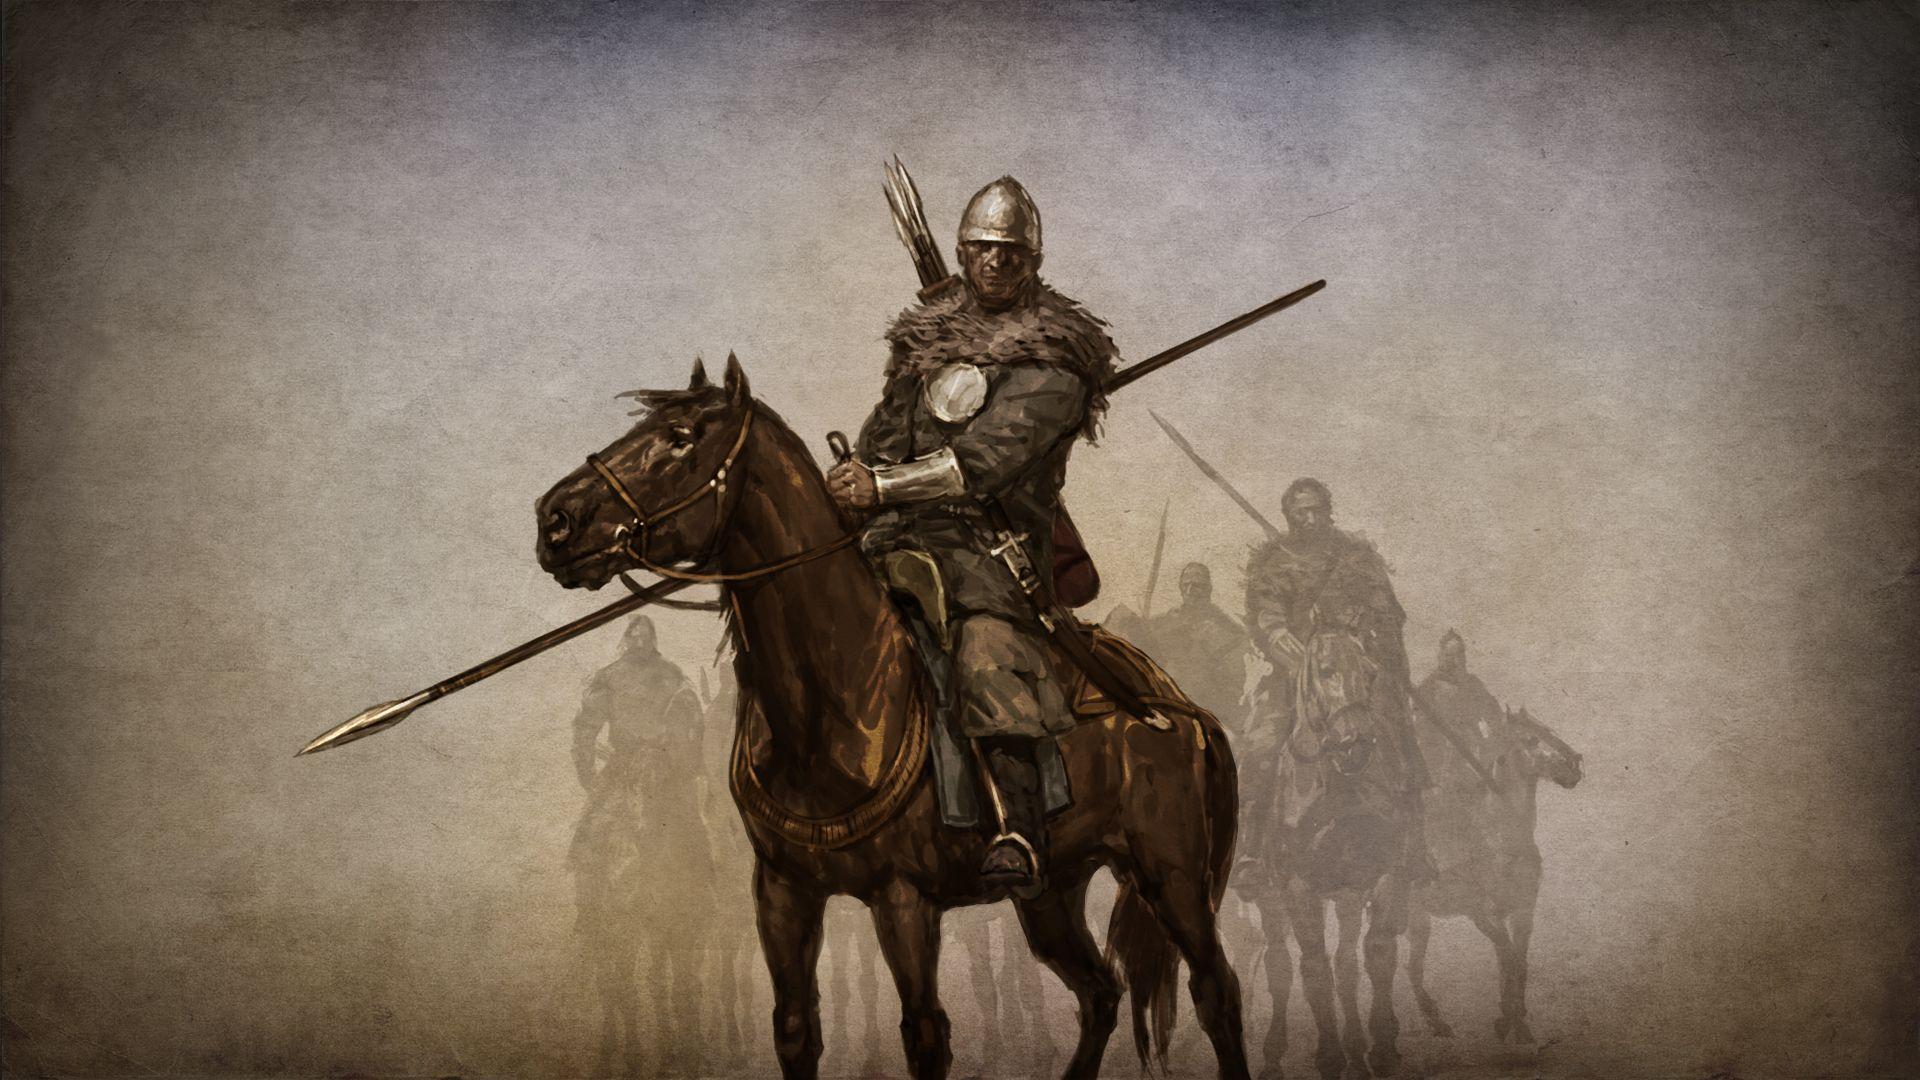 mount and blade warband 64 bit